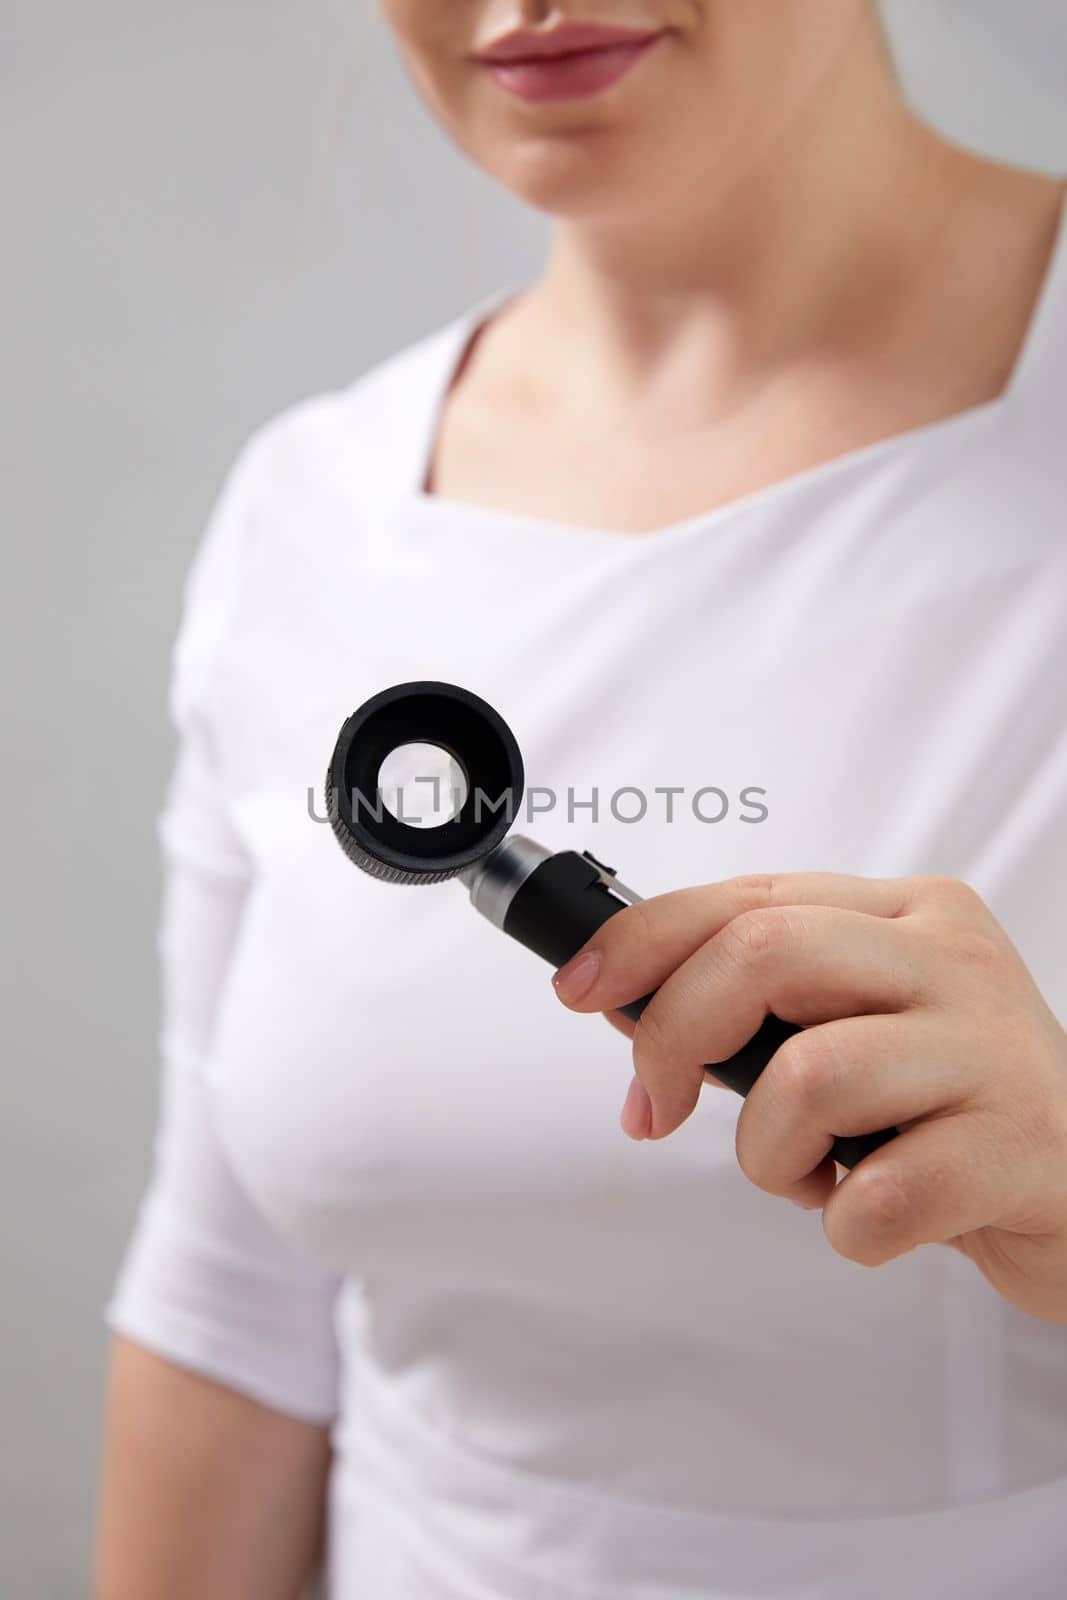 Female doctor looking at patient's skin through magnifying glass. Professional dermatologist and skincare specialist investigating moles or tumor growth signs on wfemale face. Skin checkup concept